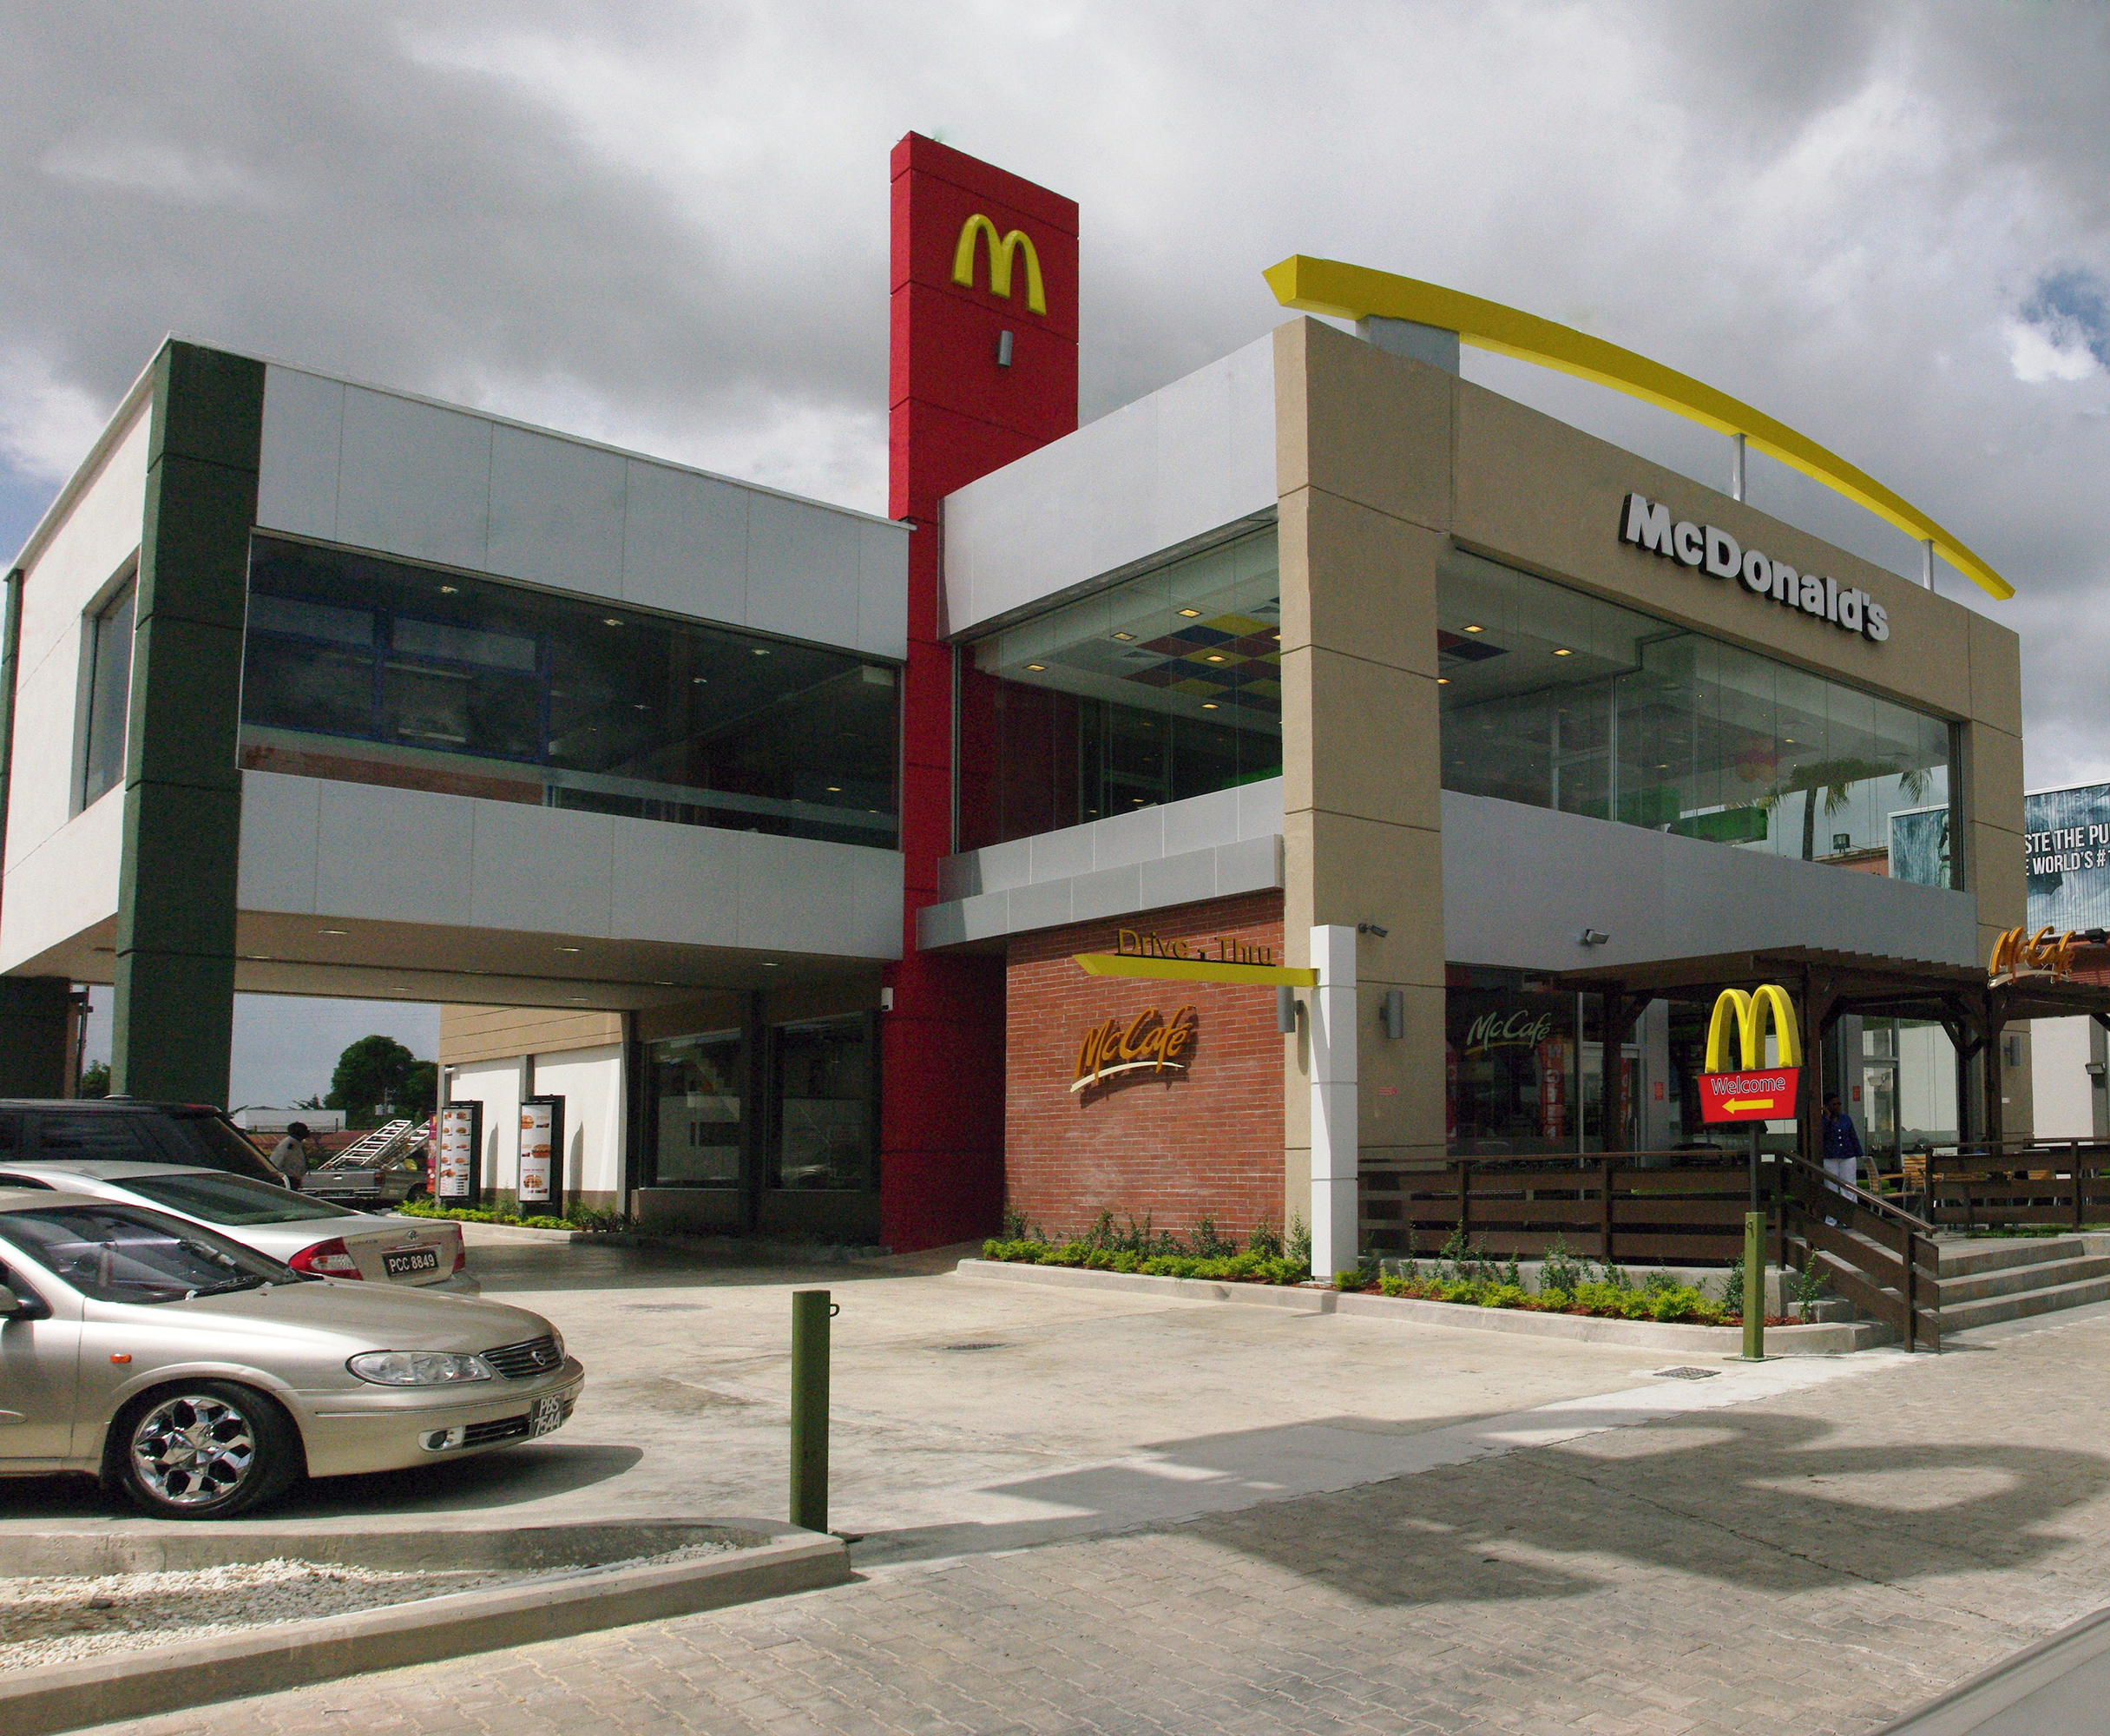 PHOTO: This photo shows a McDonald's in Trinidad which opened early in 2012.